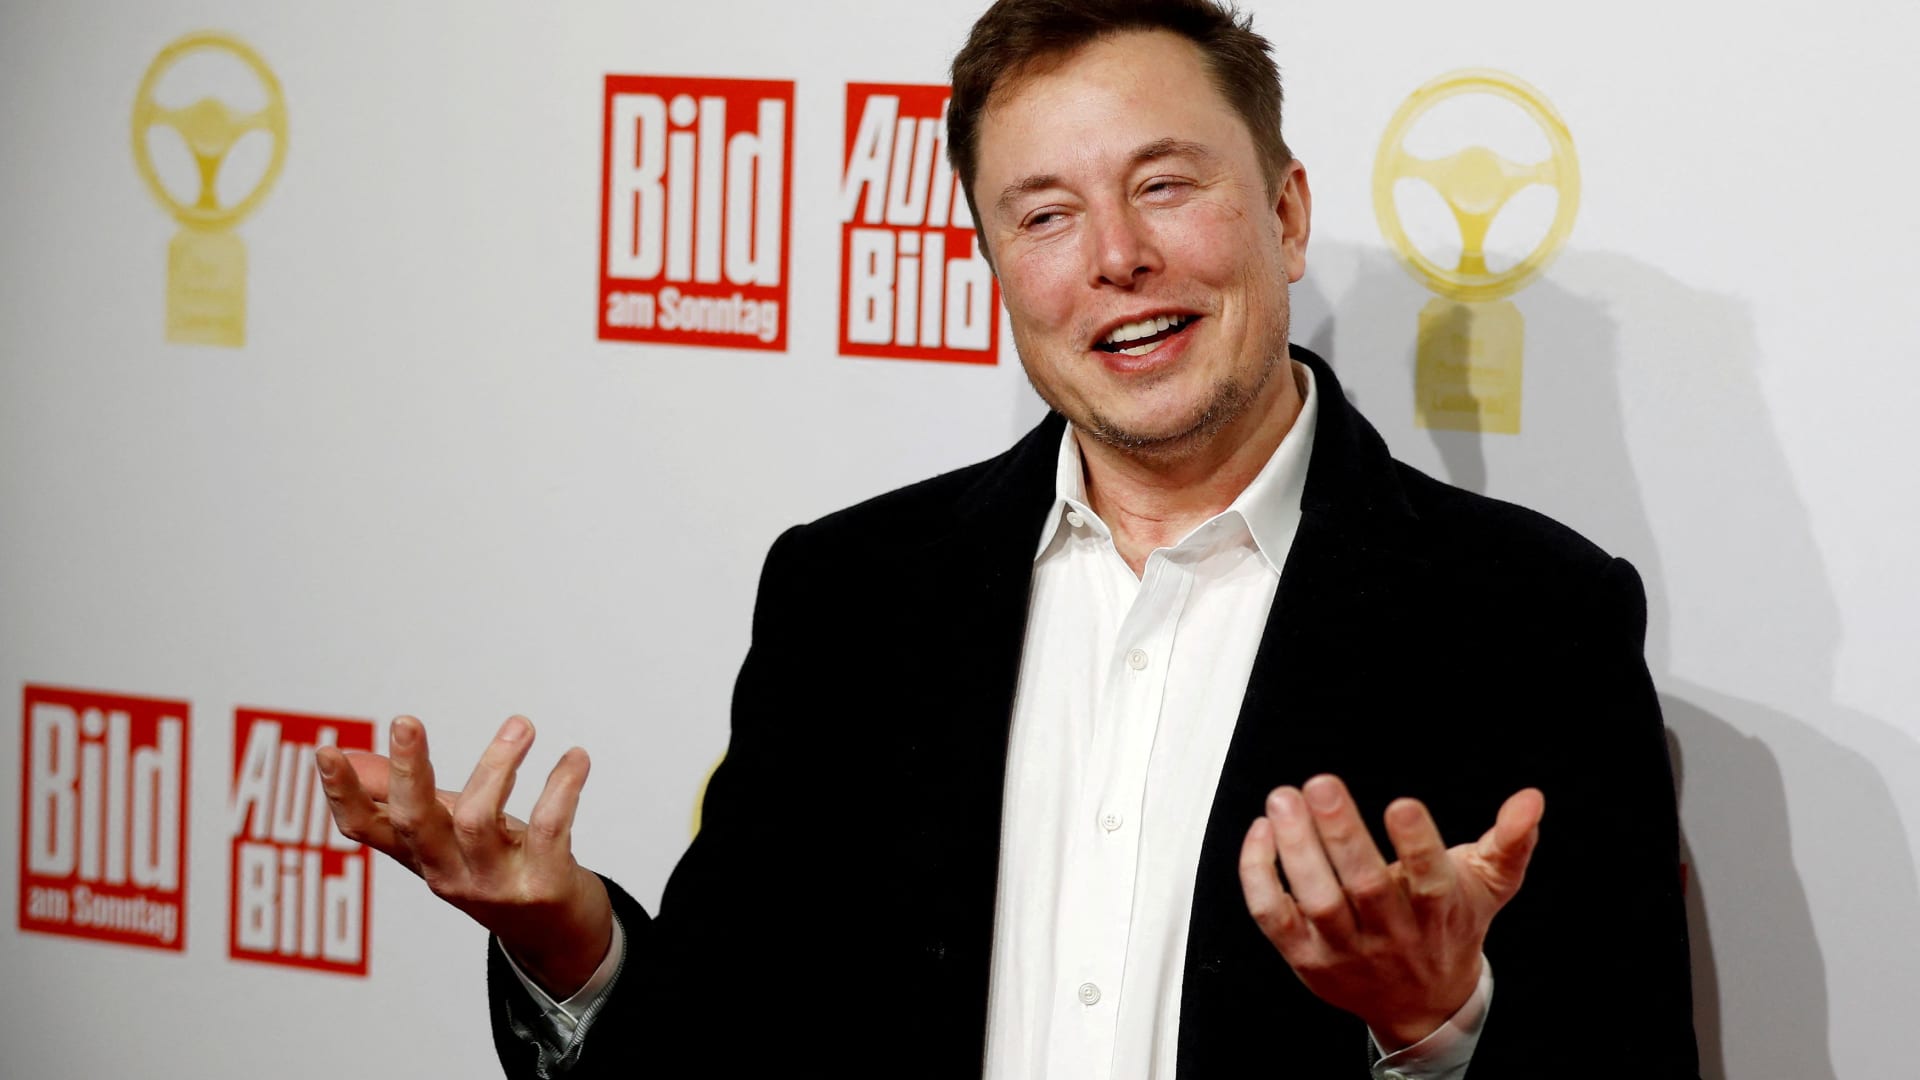 Twitter owner Elon Musk met with civil rights leaders Tuesday — here's what happened